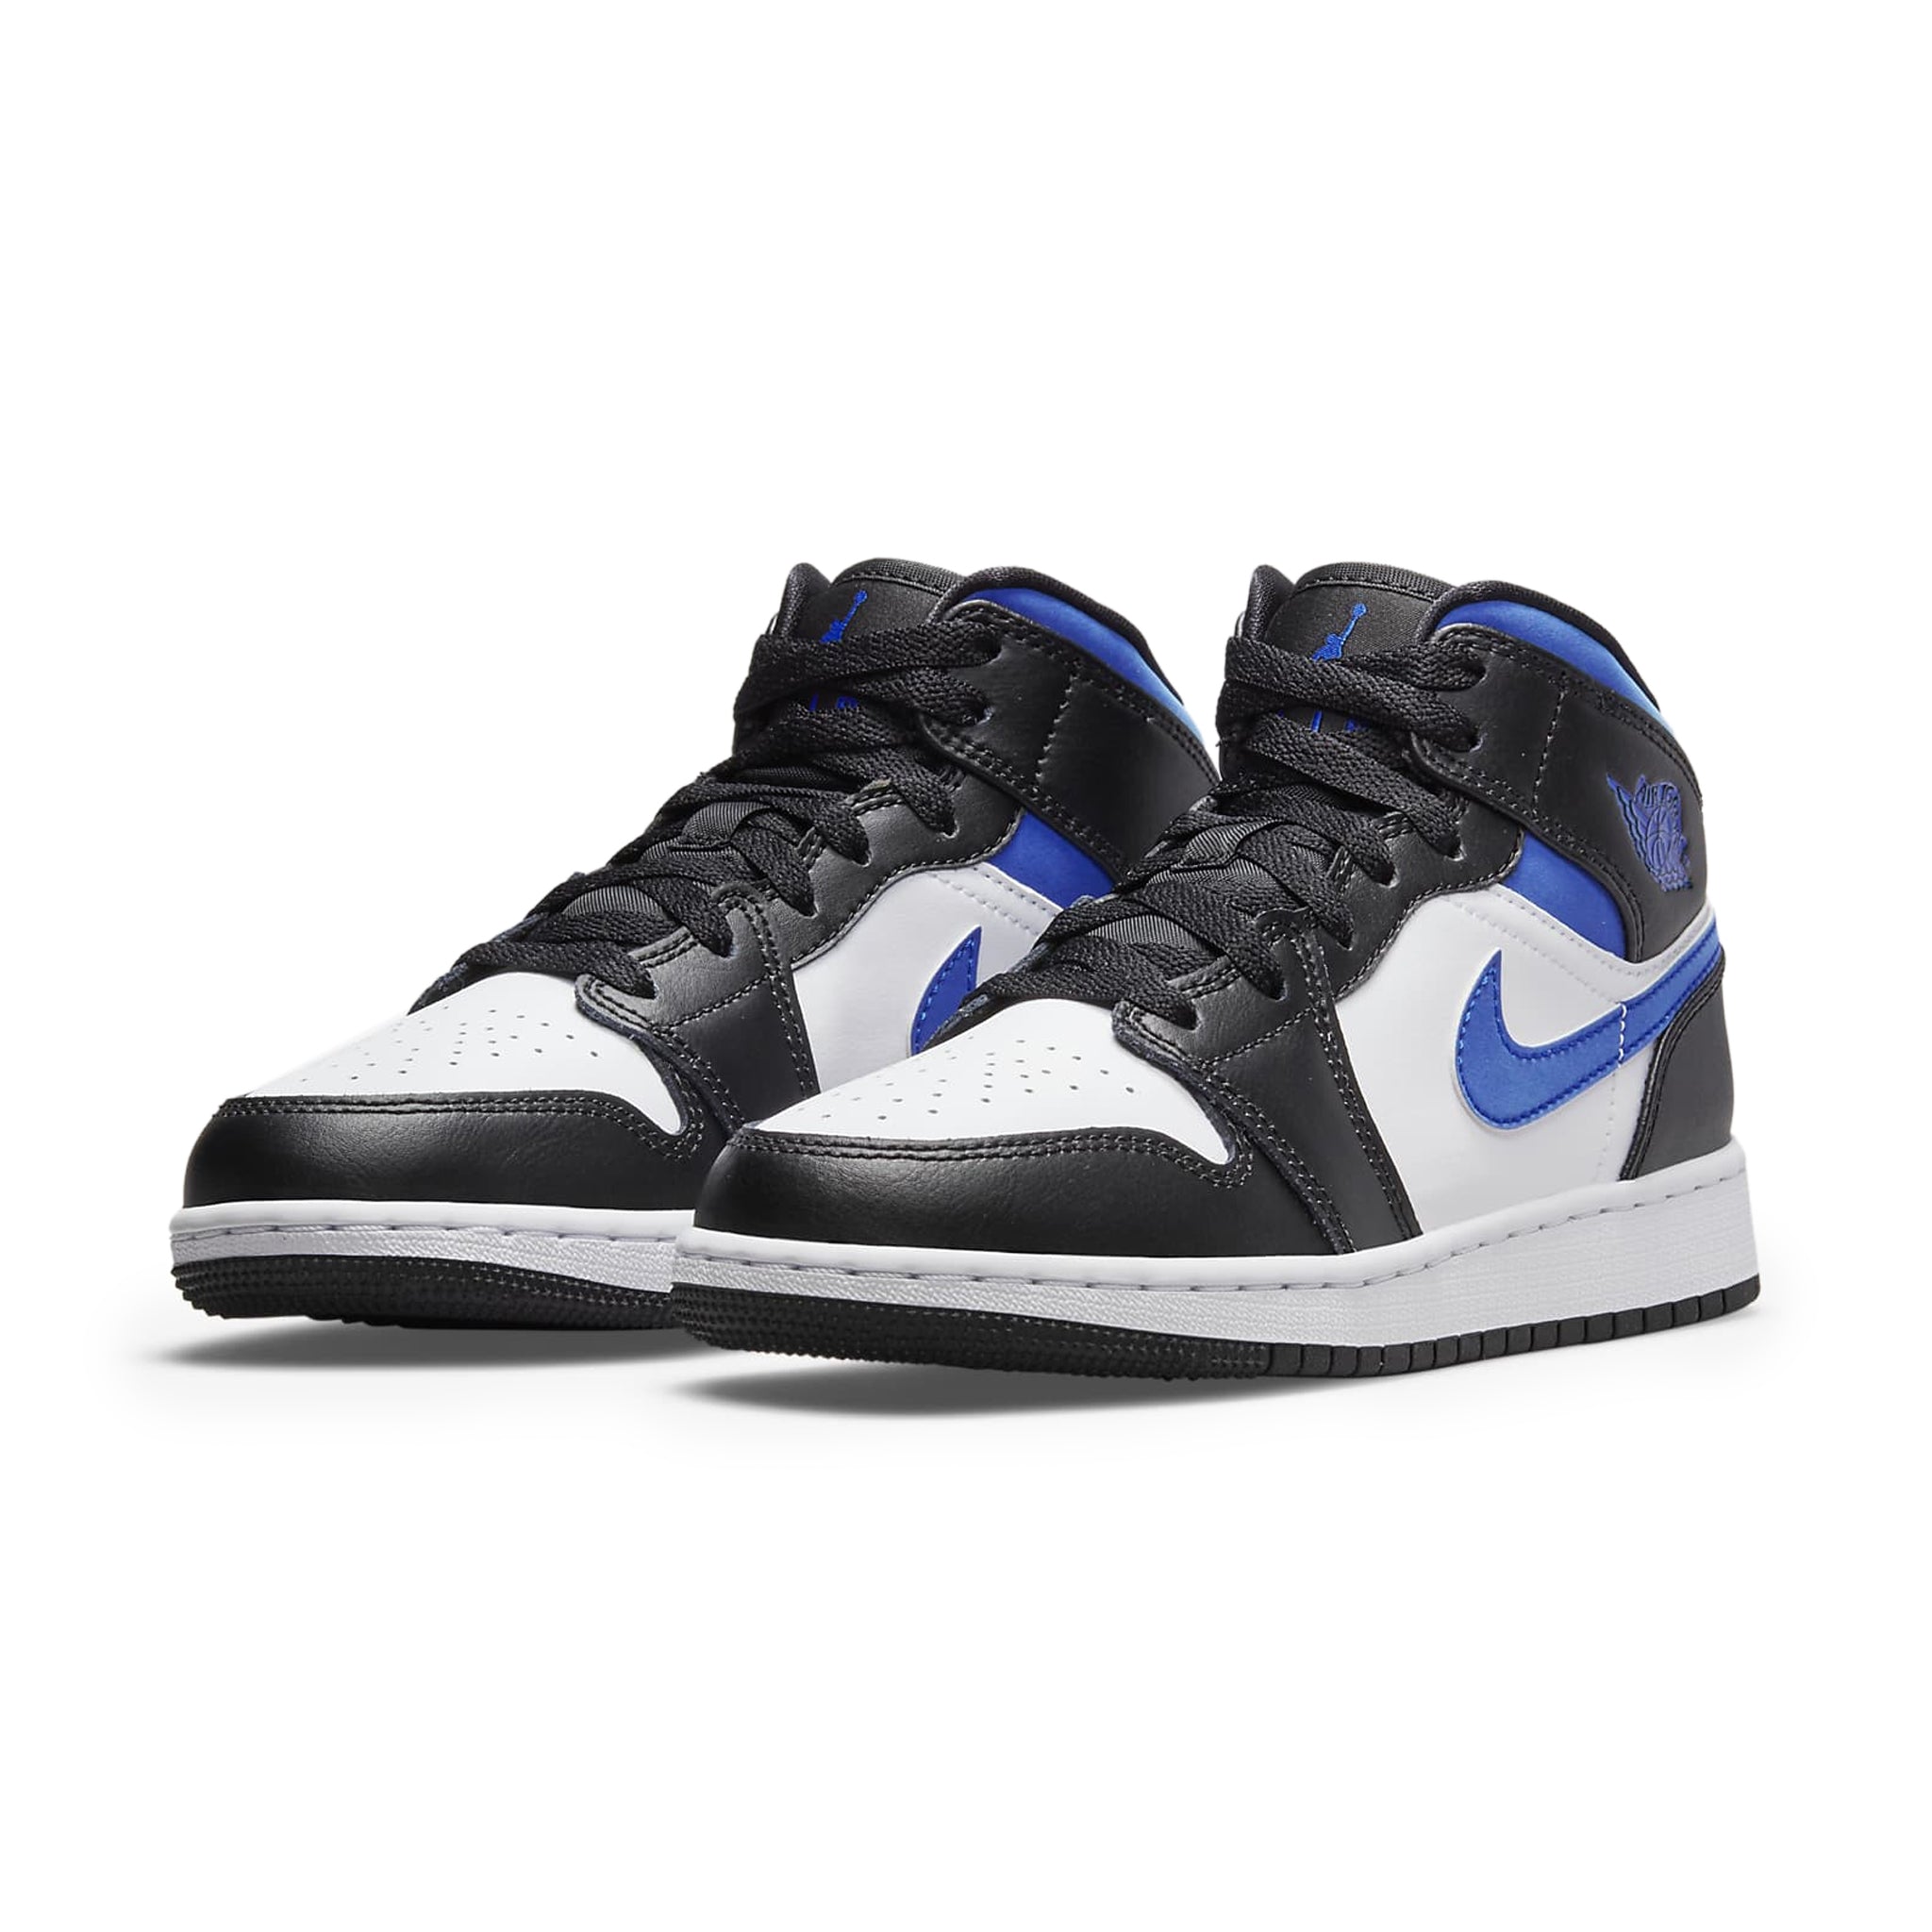 Front side view of Air Jordan 1 Mid Racer Blue 2.0 (GS) 554725-140